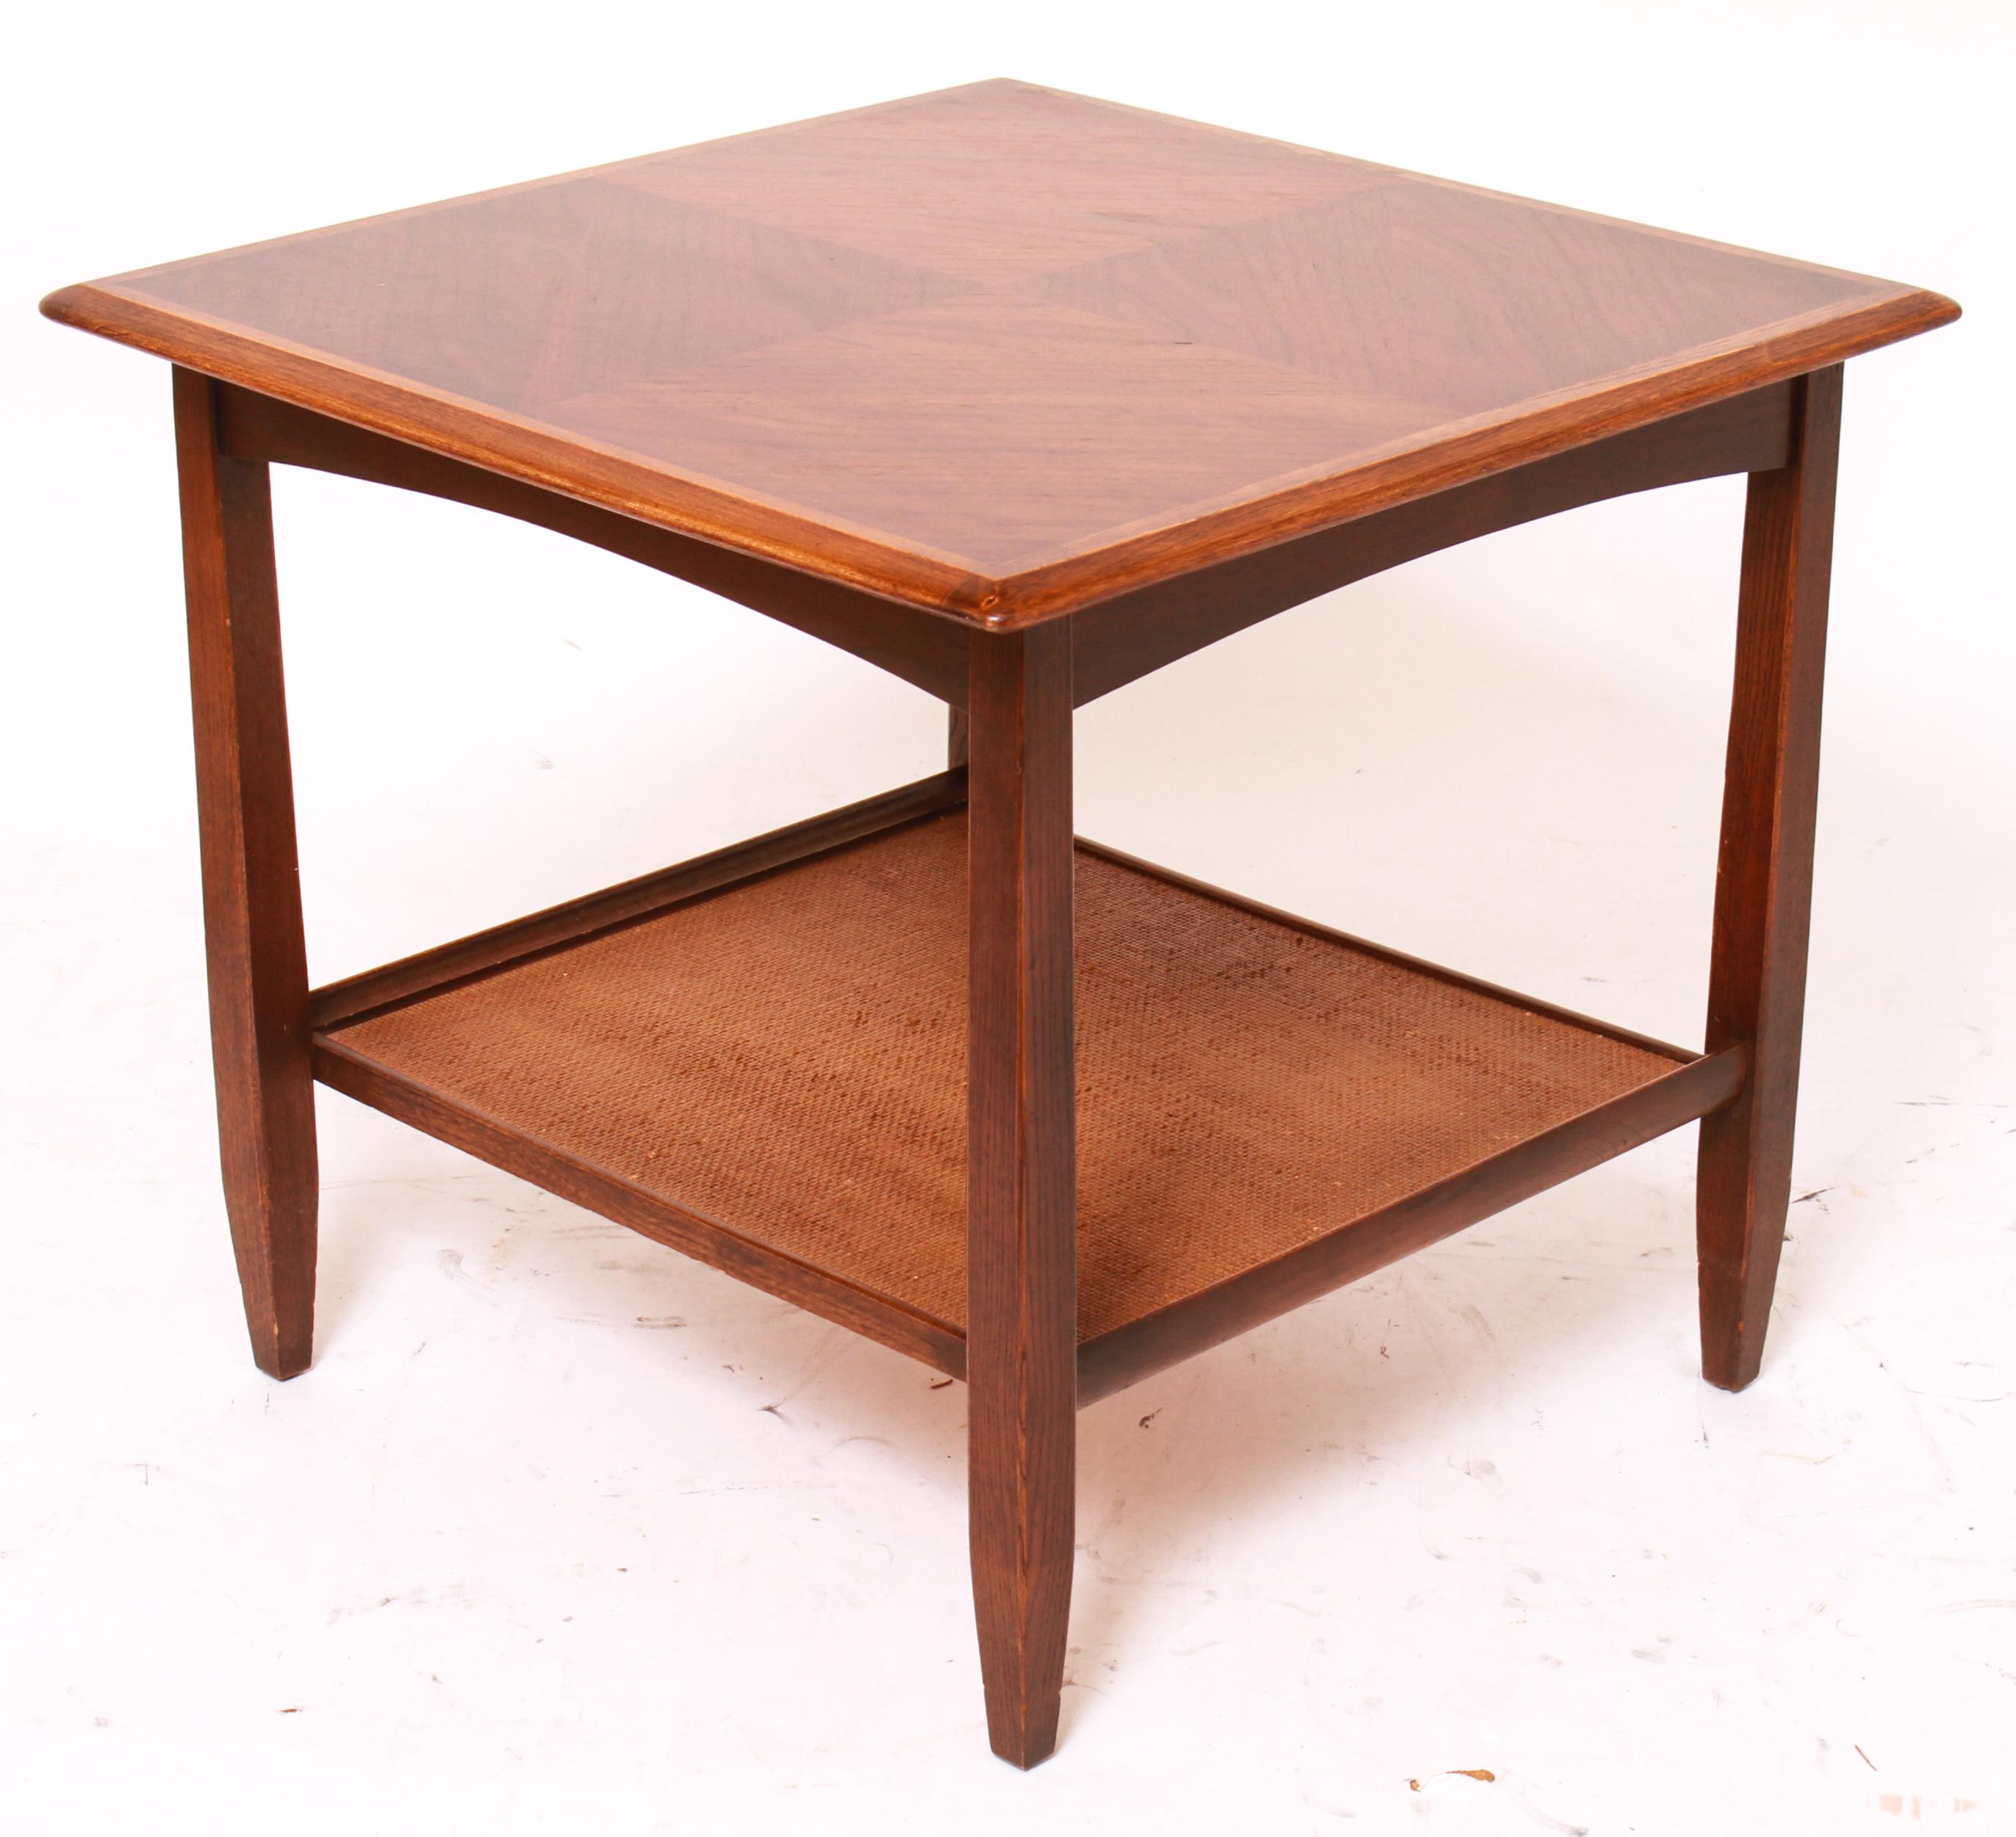 Mid-Century Modern wood end table or side table with a wood top and a rattan-lined lower shelf, made by Bassett Furniture Inc. Partial makers stamp on the bottom. The piece is in great vintage condition with age-appropriate wear.